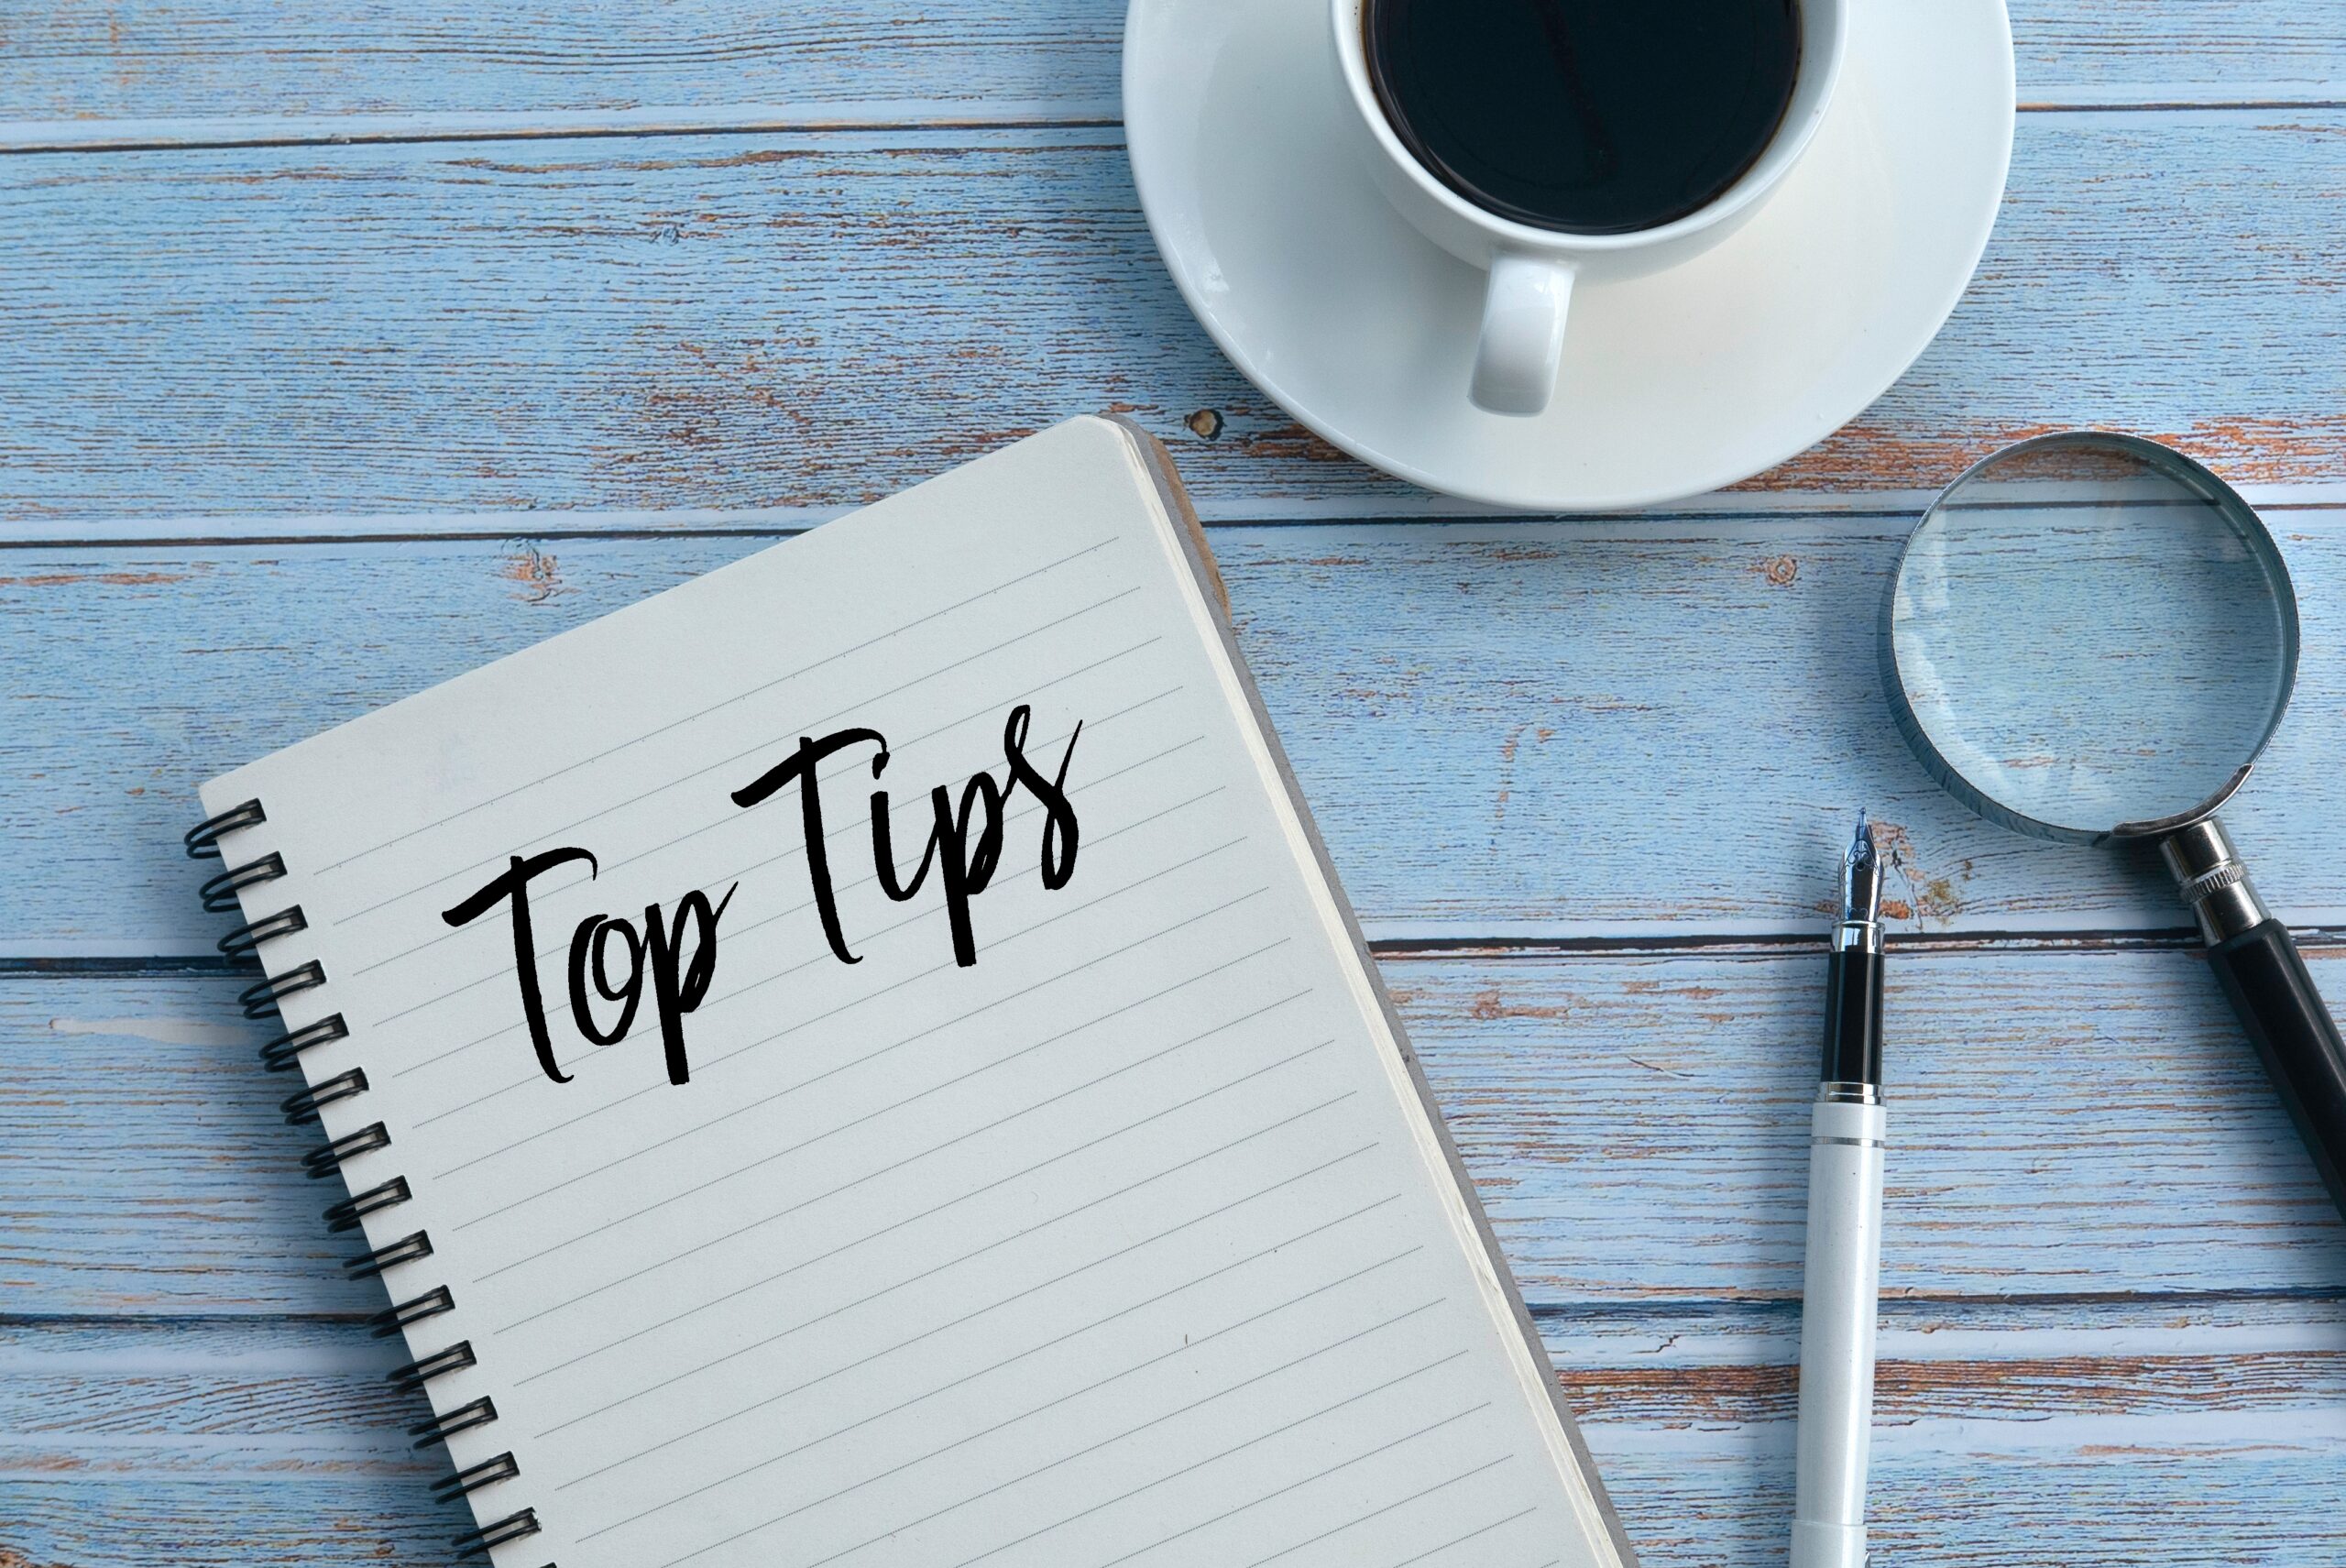 Notepad that says "Top Tips", next to a cup of coffee and pen.